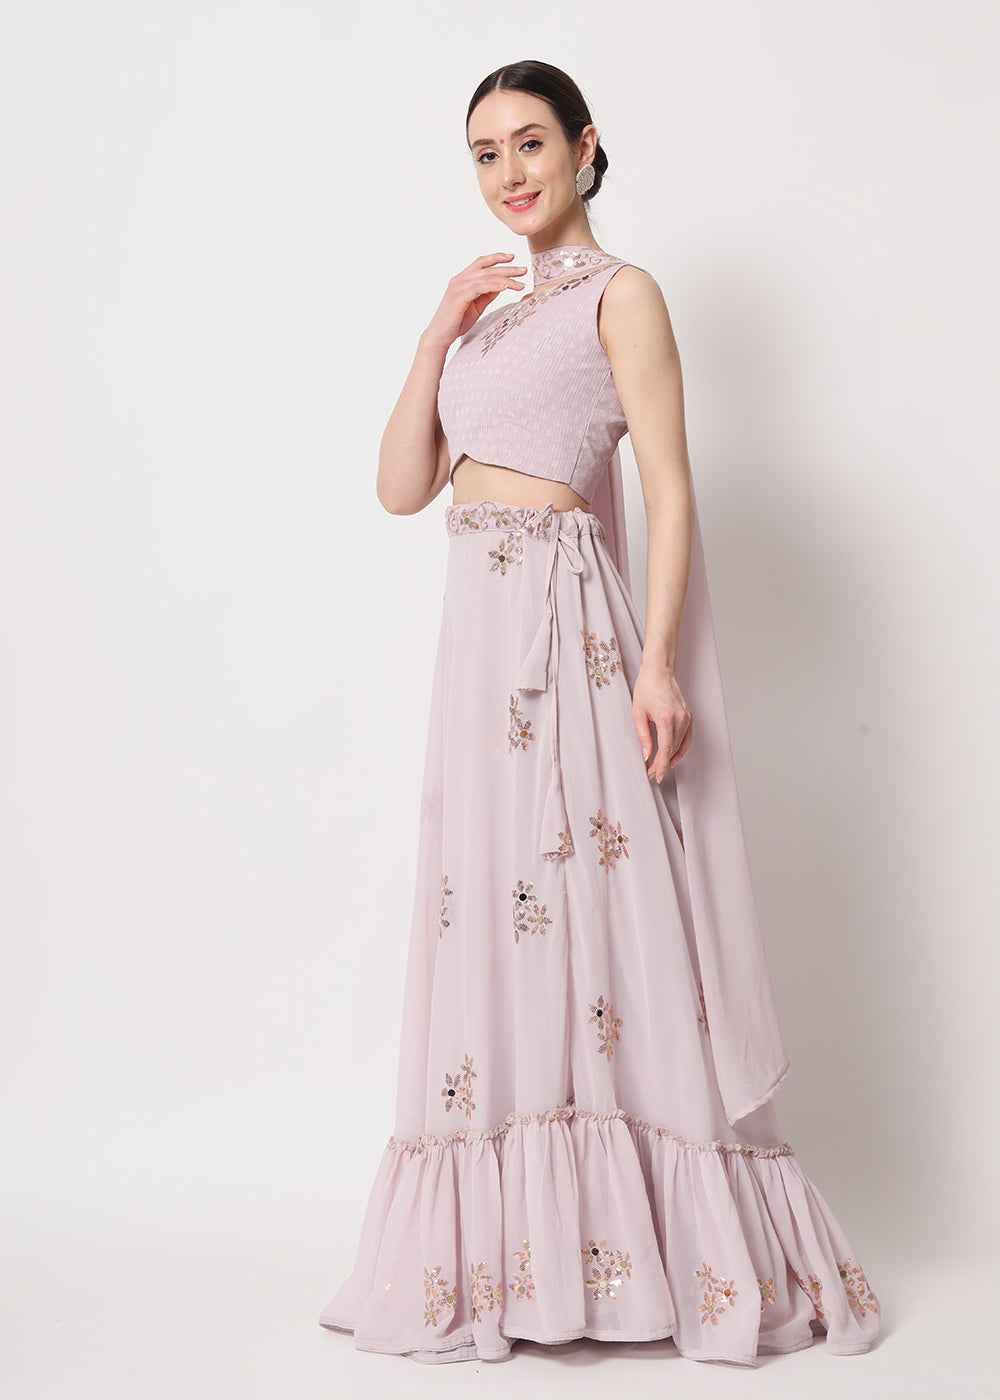 Buy Now Party Wear Attractive Dusky Pink Georgette Patterned Lehenga Choli Online in USA, UK, Canada & Worldwide at Empress Clothing.